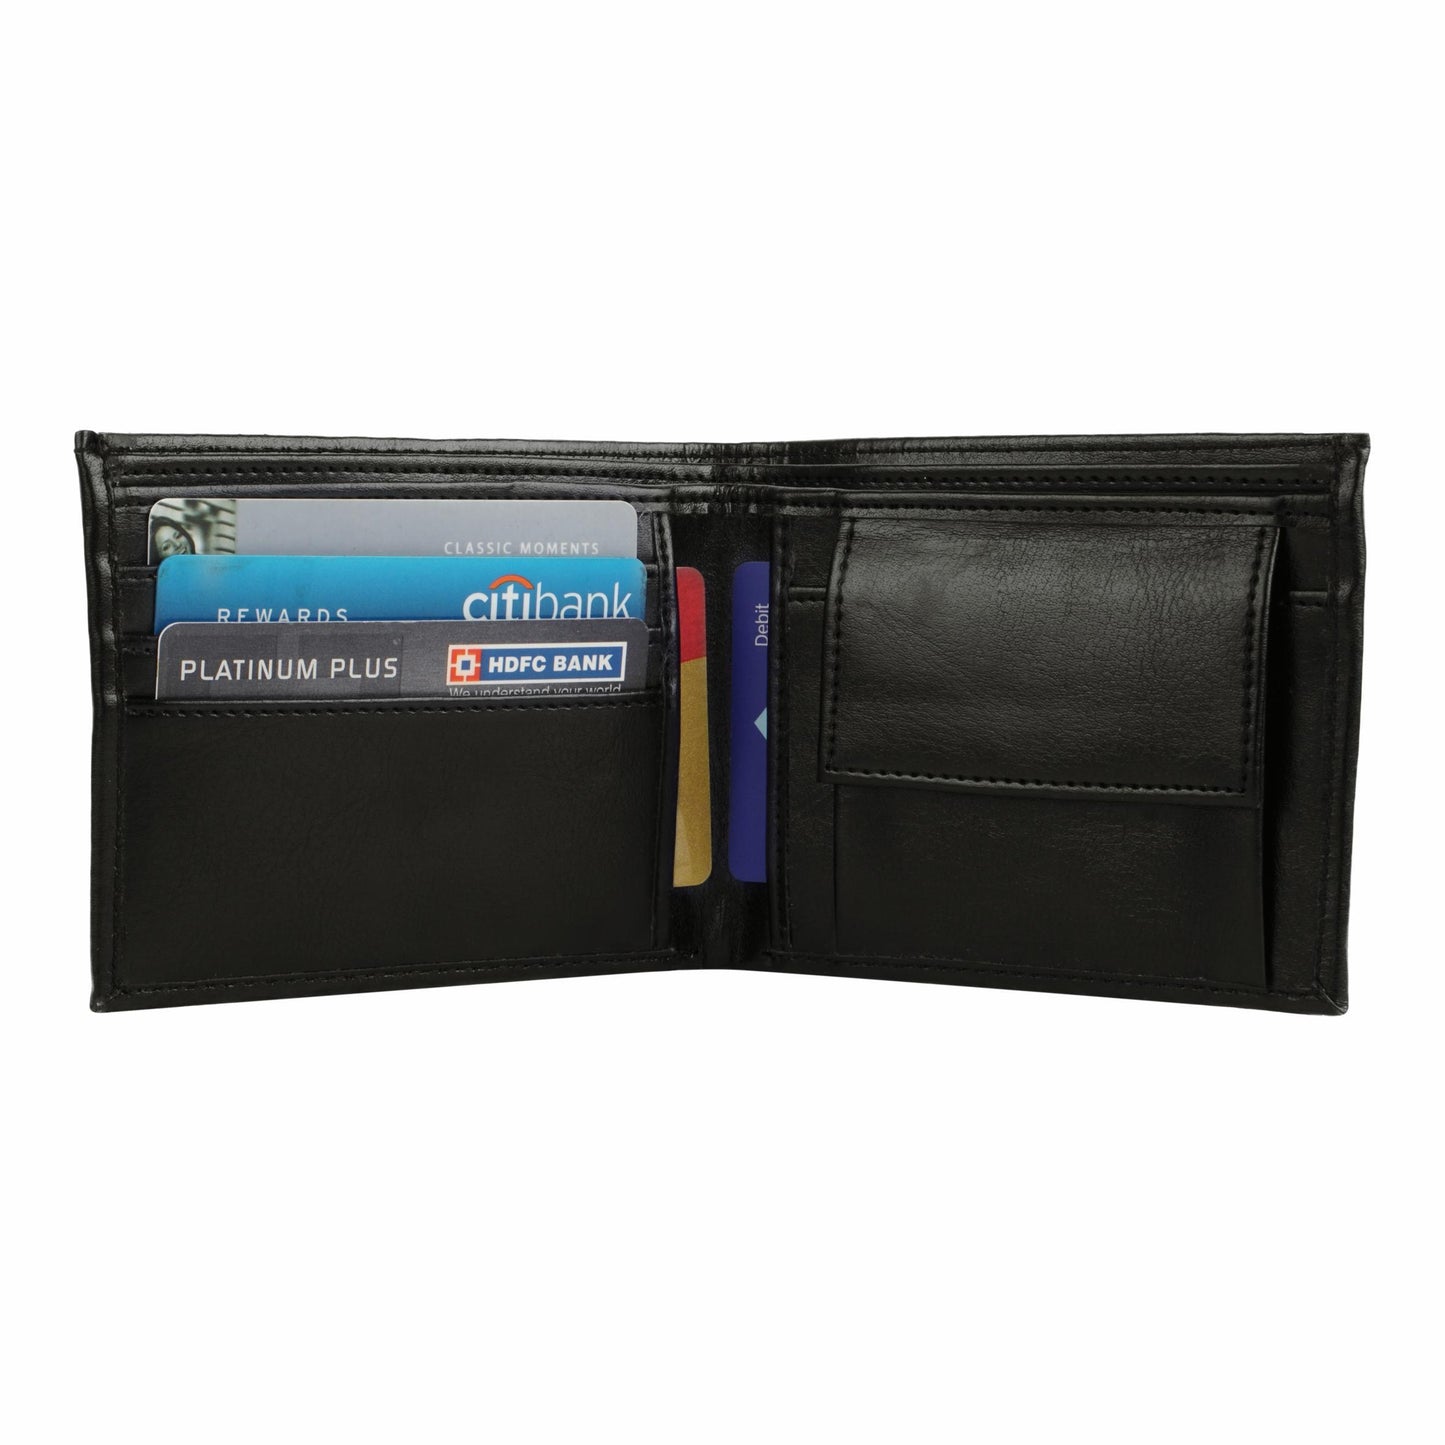 Pen and Wallet 2in1 Combo Gift Set - For Employee Joining Kit, Corporate, Client or Dealer Gifting, Promotional Freebie JK27